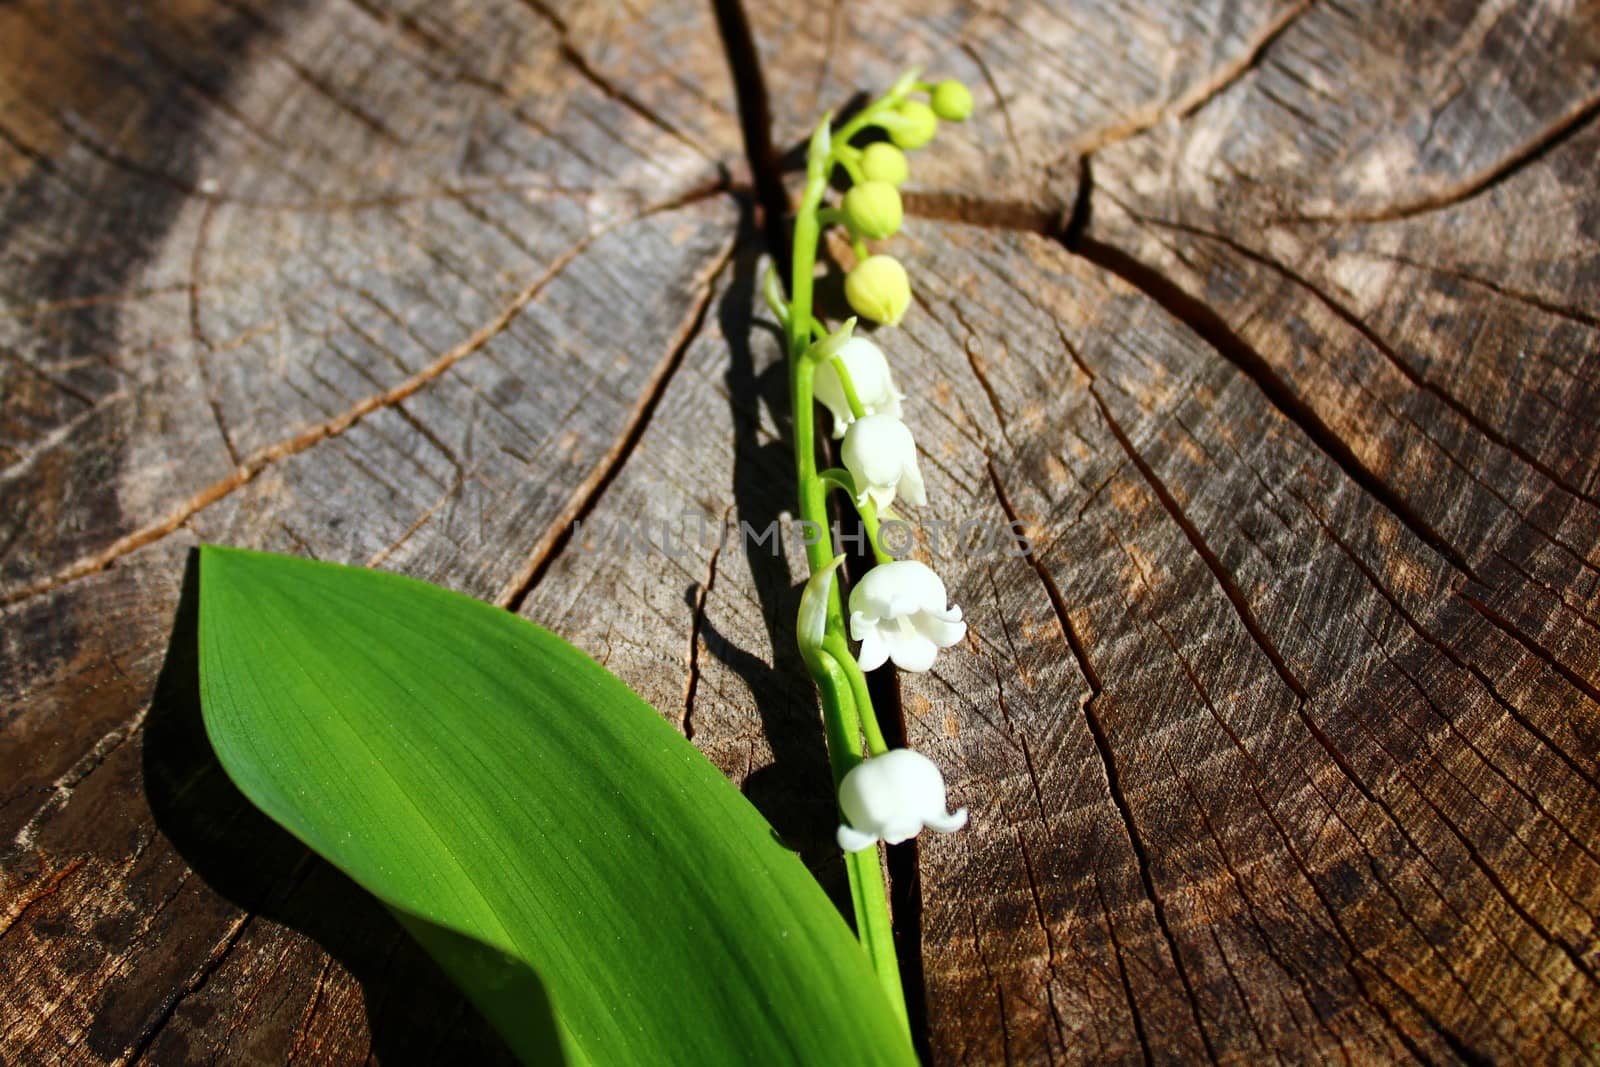 The pictureshows lily of the valley on a weathered tree trunk.